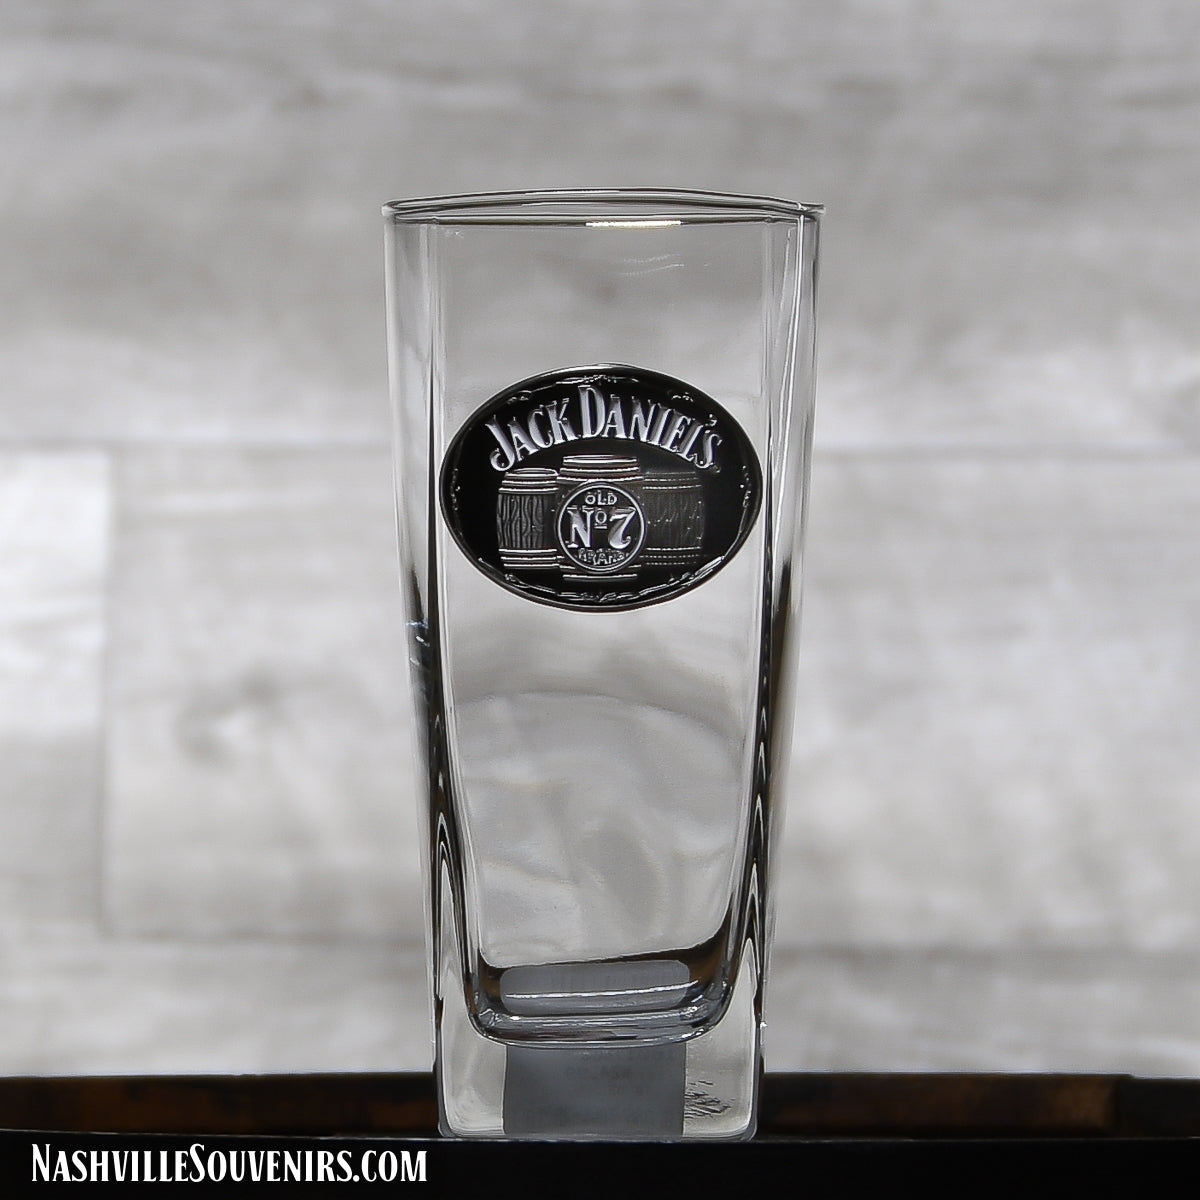 Officially licensed Jack Daniel's Tall Rocks Glass with Medallion.. FREE SHIPPING on all US orders over $75!